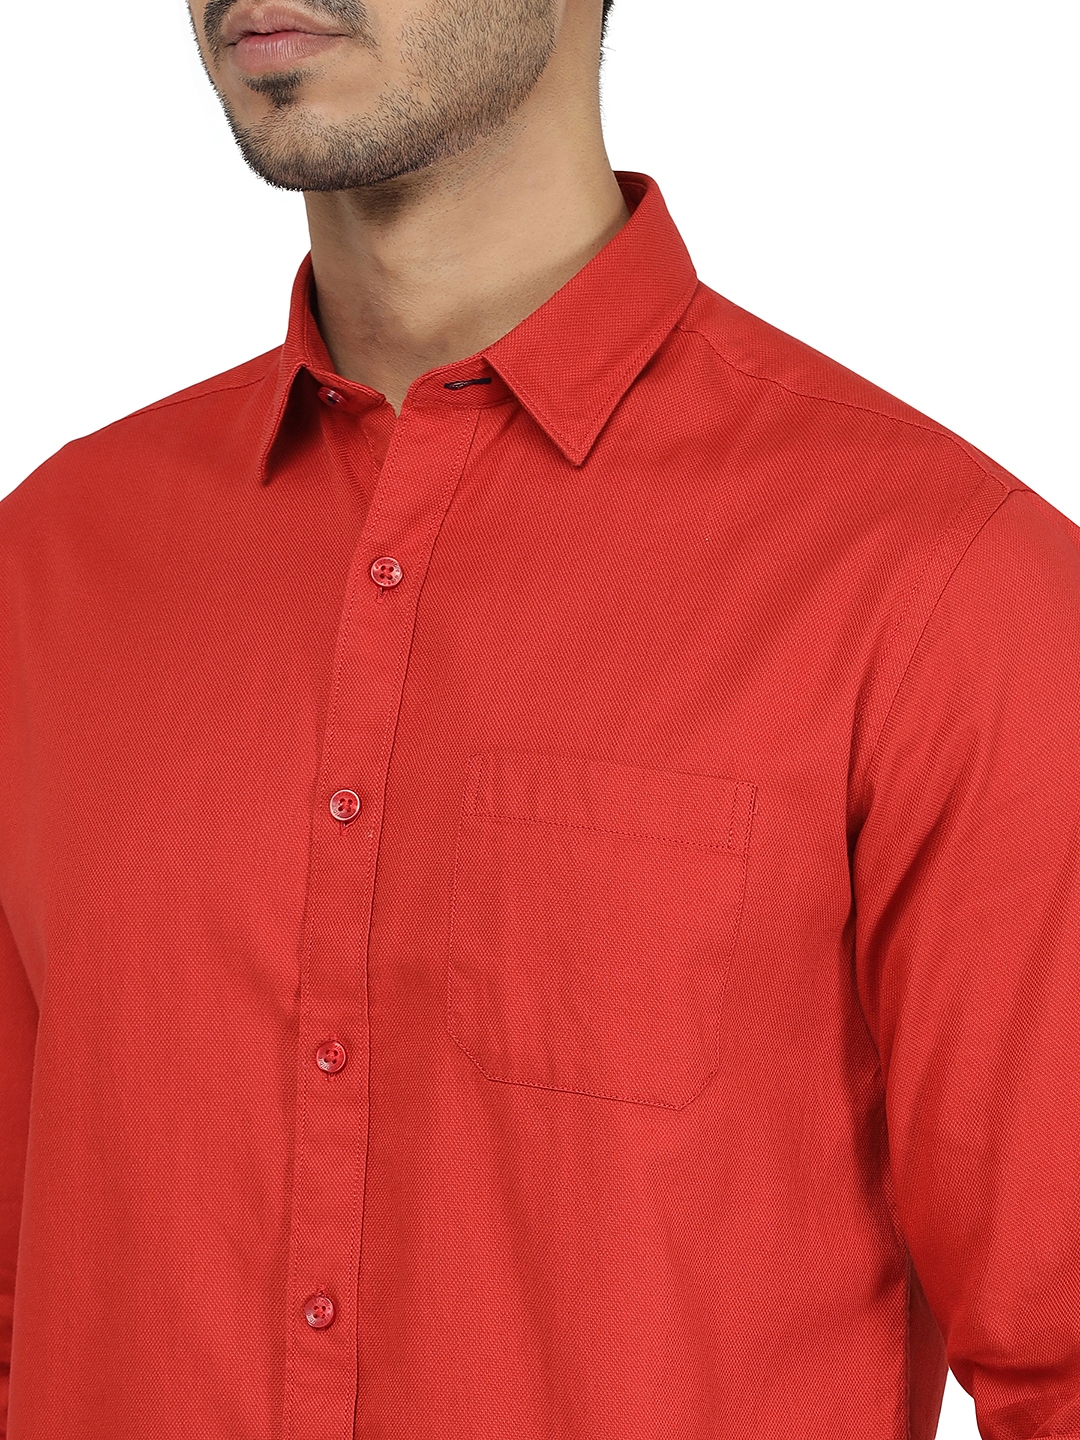 Greenfibre | Paprika Red Solid Classic Fit Casual Shirt | Greenfibre 4